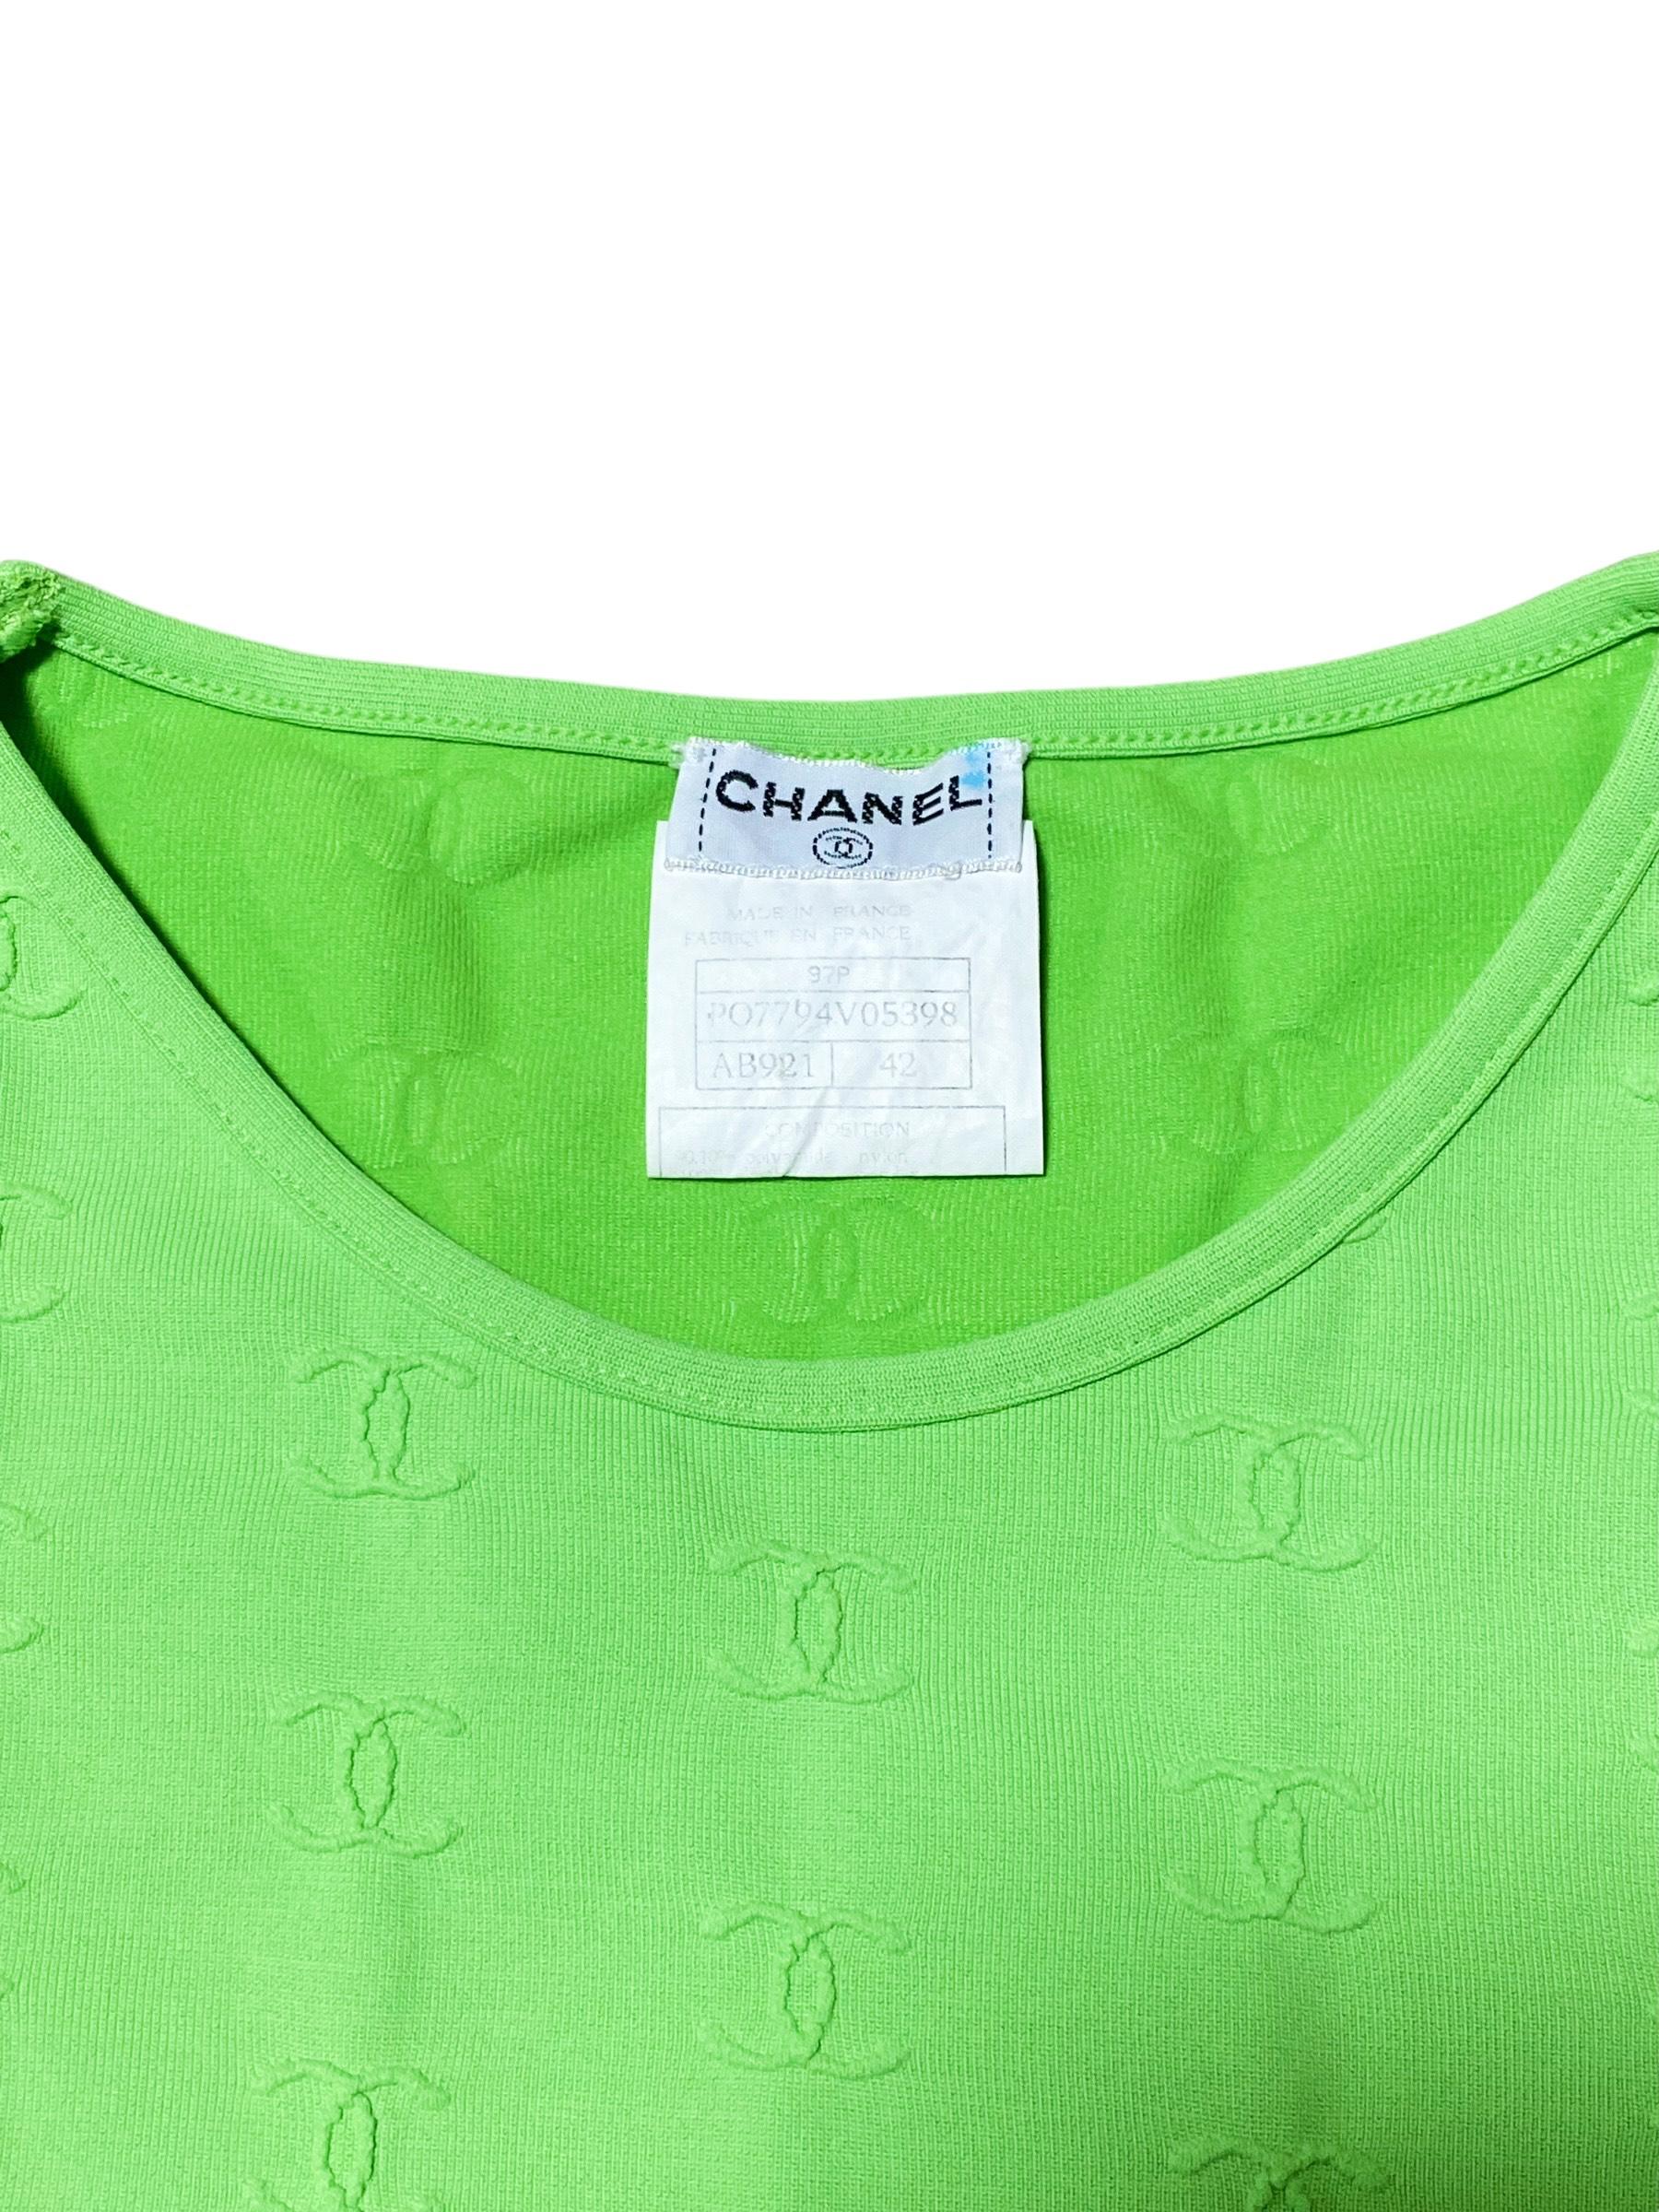 Women's Vintage 90's CHANEL green top For Sale